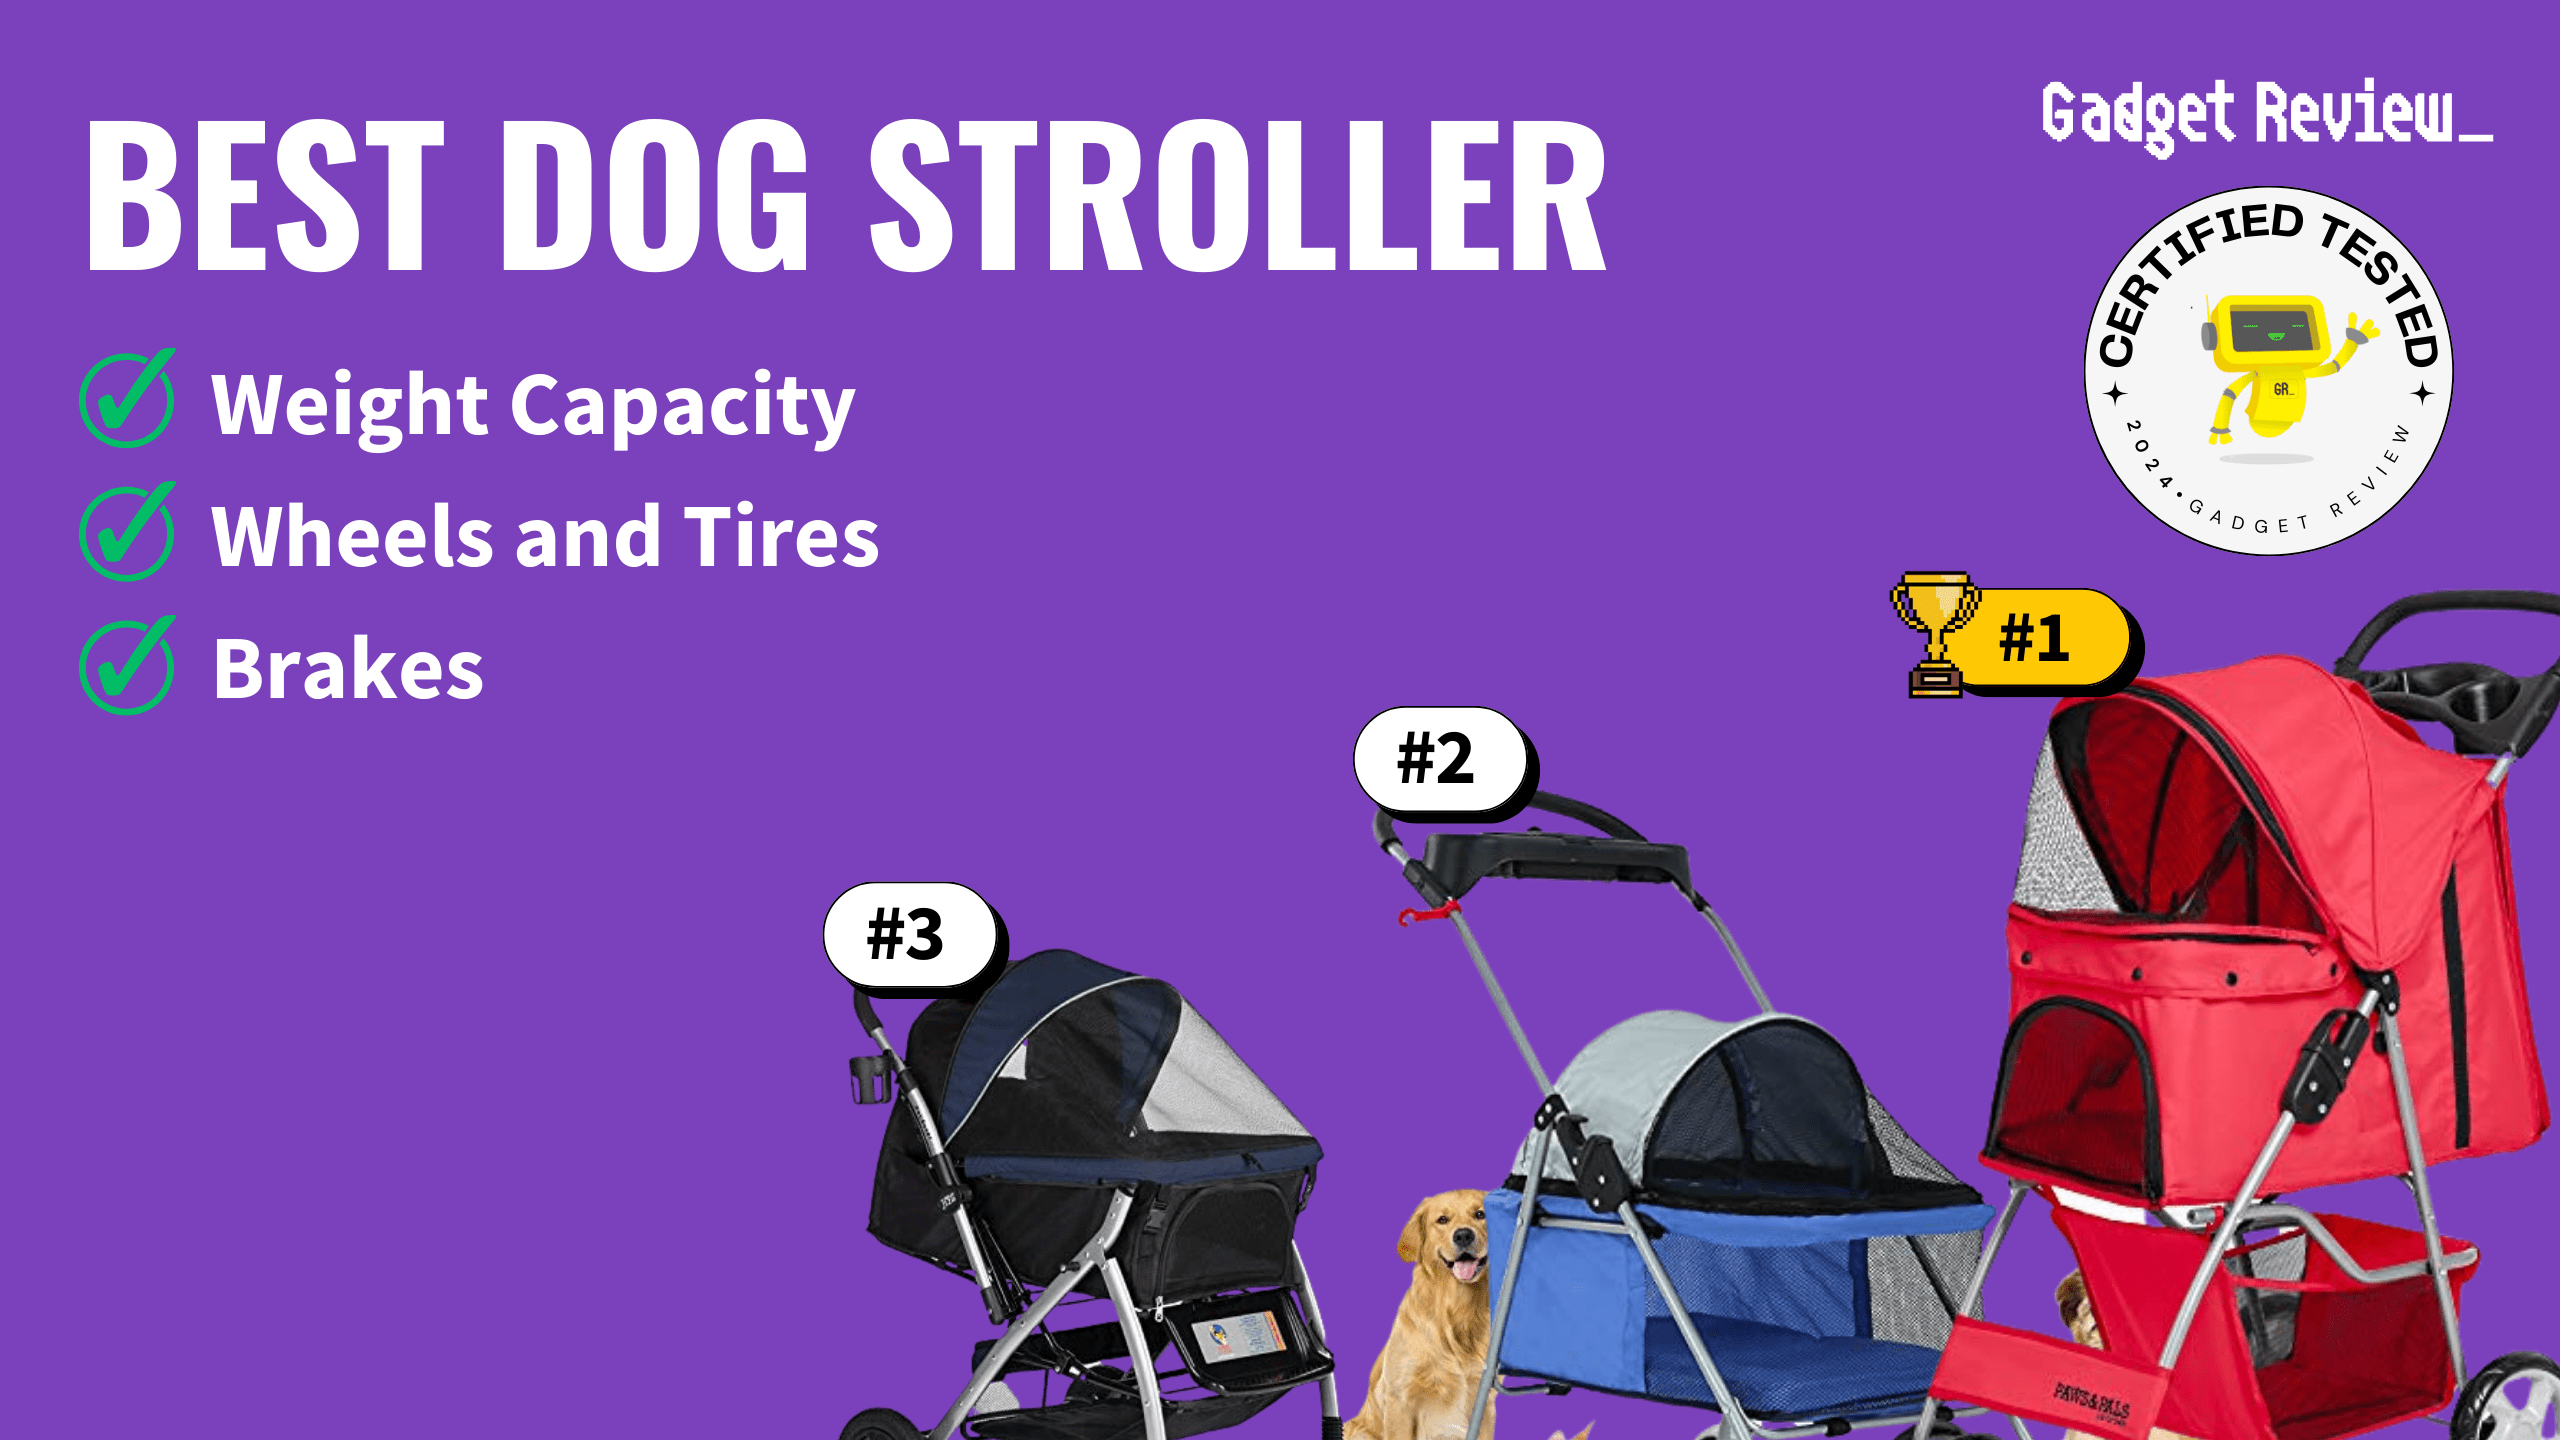 best dog stroller guide that shows the top best pet product model